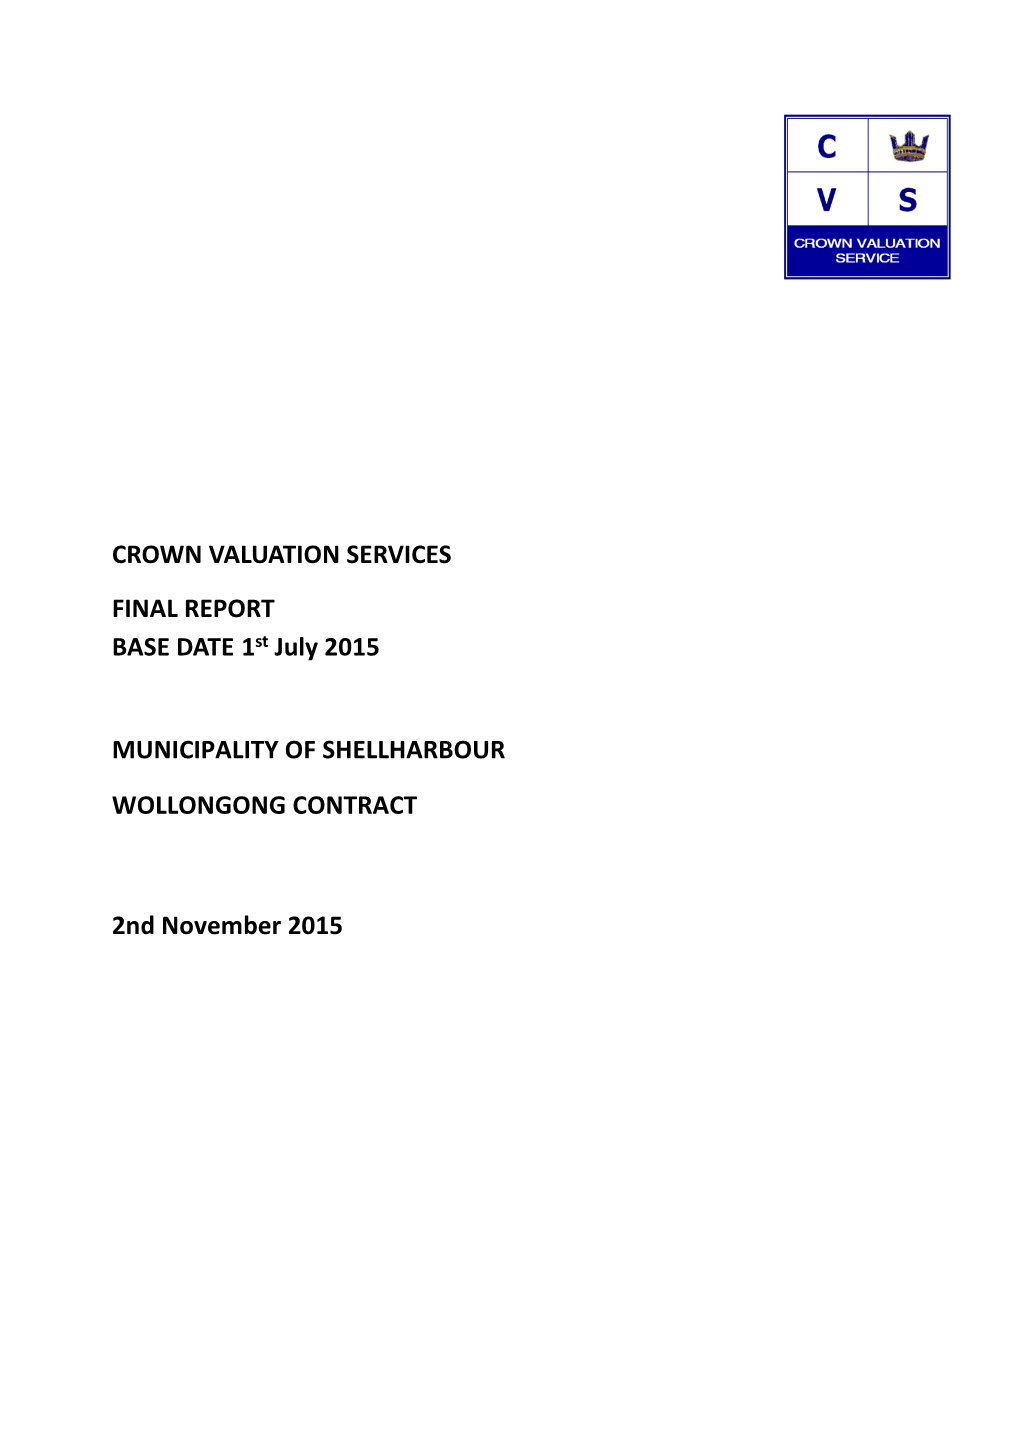 CROWN VALUATION SERVICES FINAL REPORT BASE DATE 1St July 2015